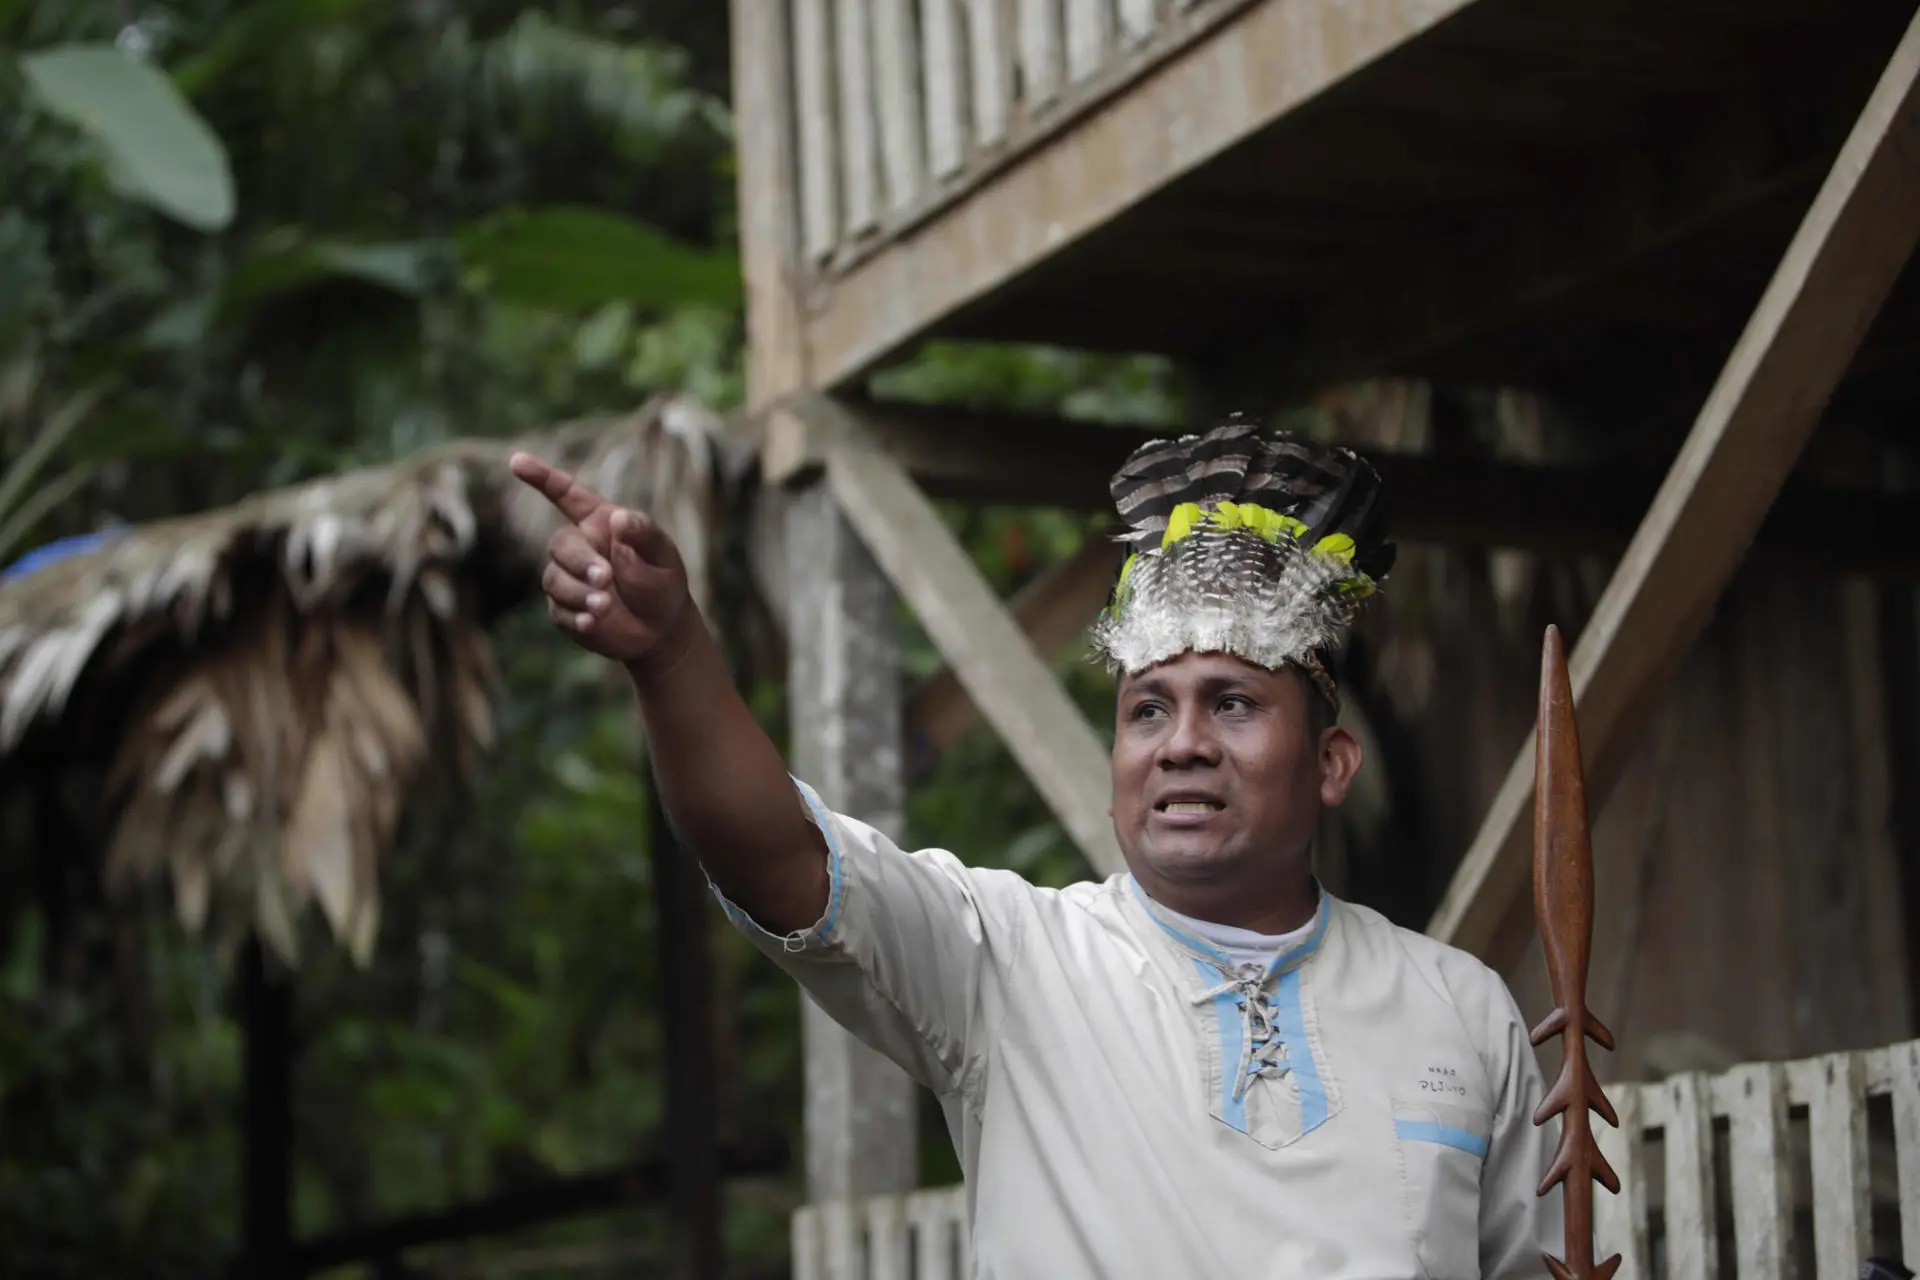 They dethrone the indigenous king of Panama convicted of the rape of a minor
